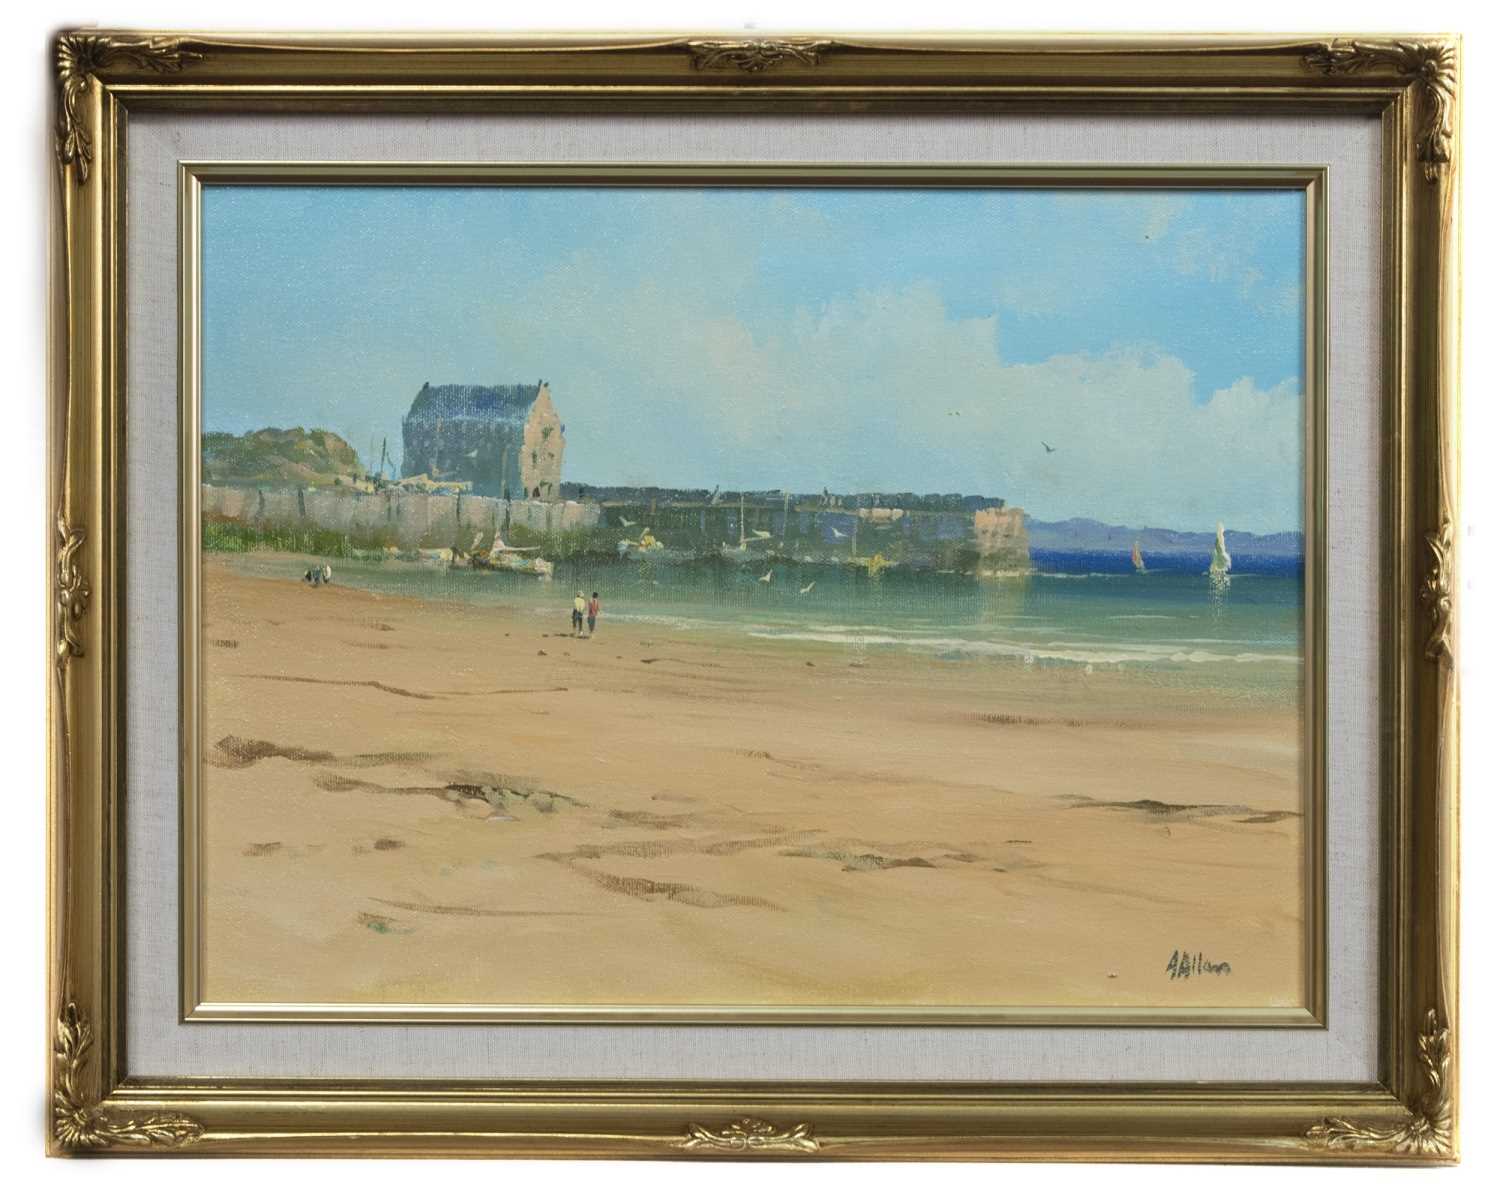 Lot 74 - ELIE HARBOUR, AN OIL BY ALFRED ALLAN